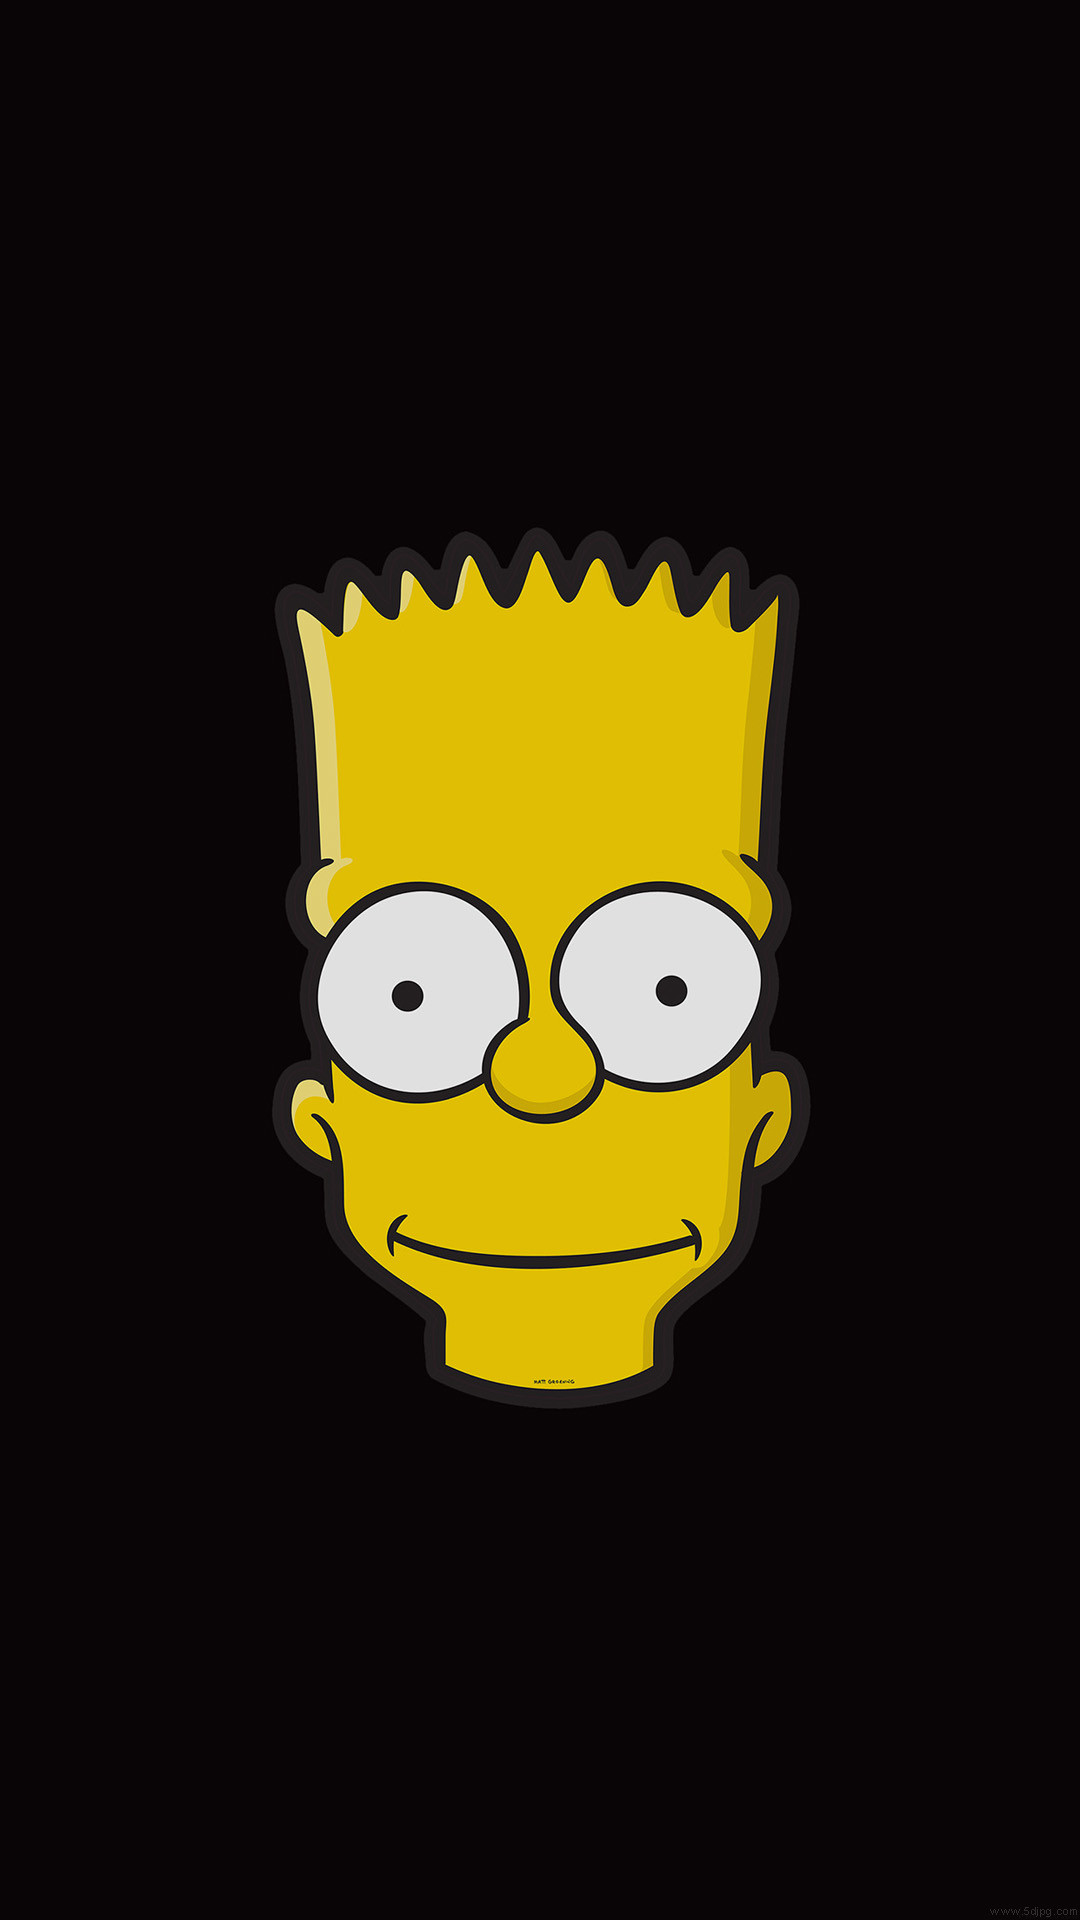 1080x1920 Download the android wallpaper. Description: Simpsons  hd ...